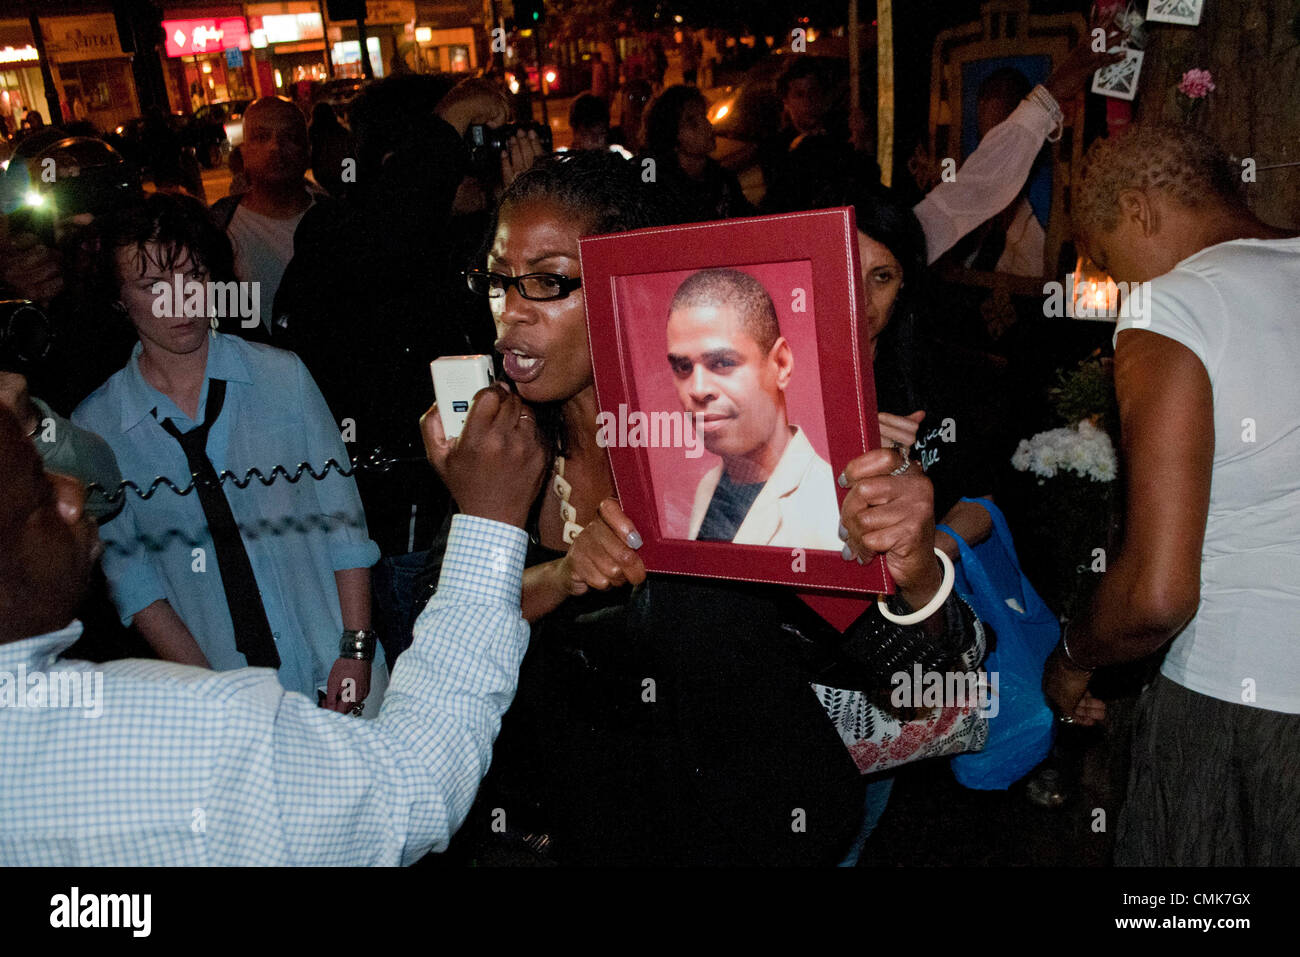 London, UK. 21/08/12. Marcia Rigg, sister of Sean Rigg who died whilst in police custody, speaks to members of the community, protesters and campaigners justice outside Brixton Police Station to hold a minutes silence. Stock Photo